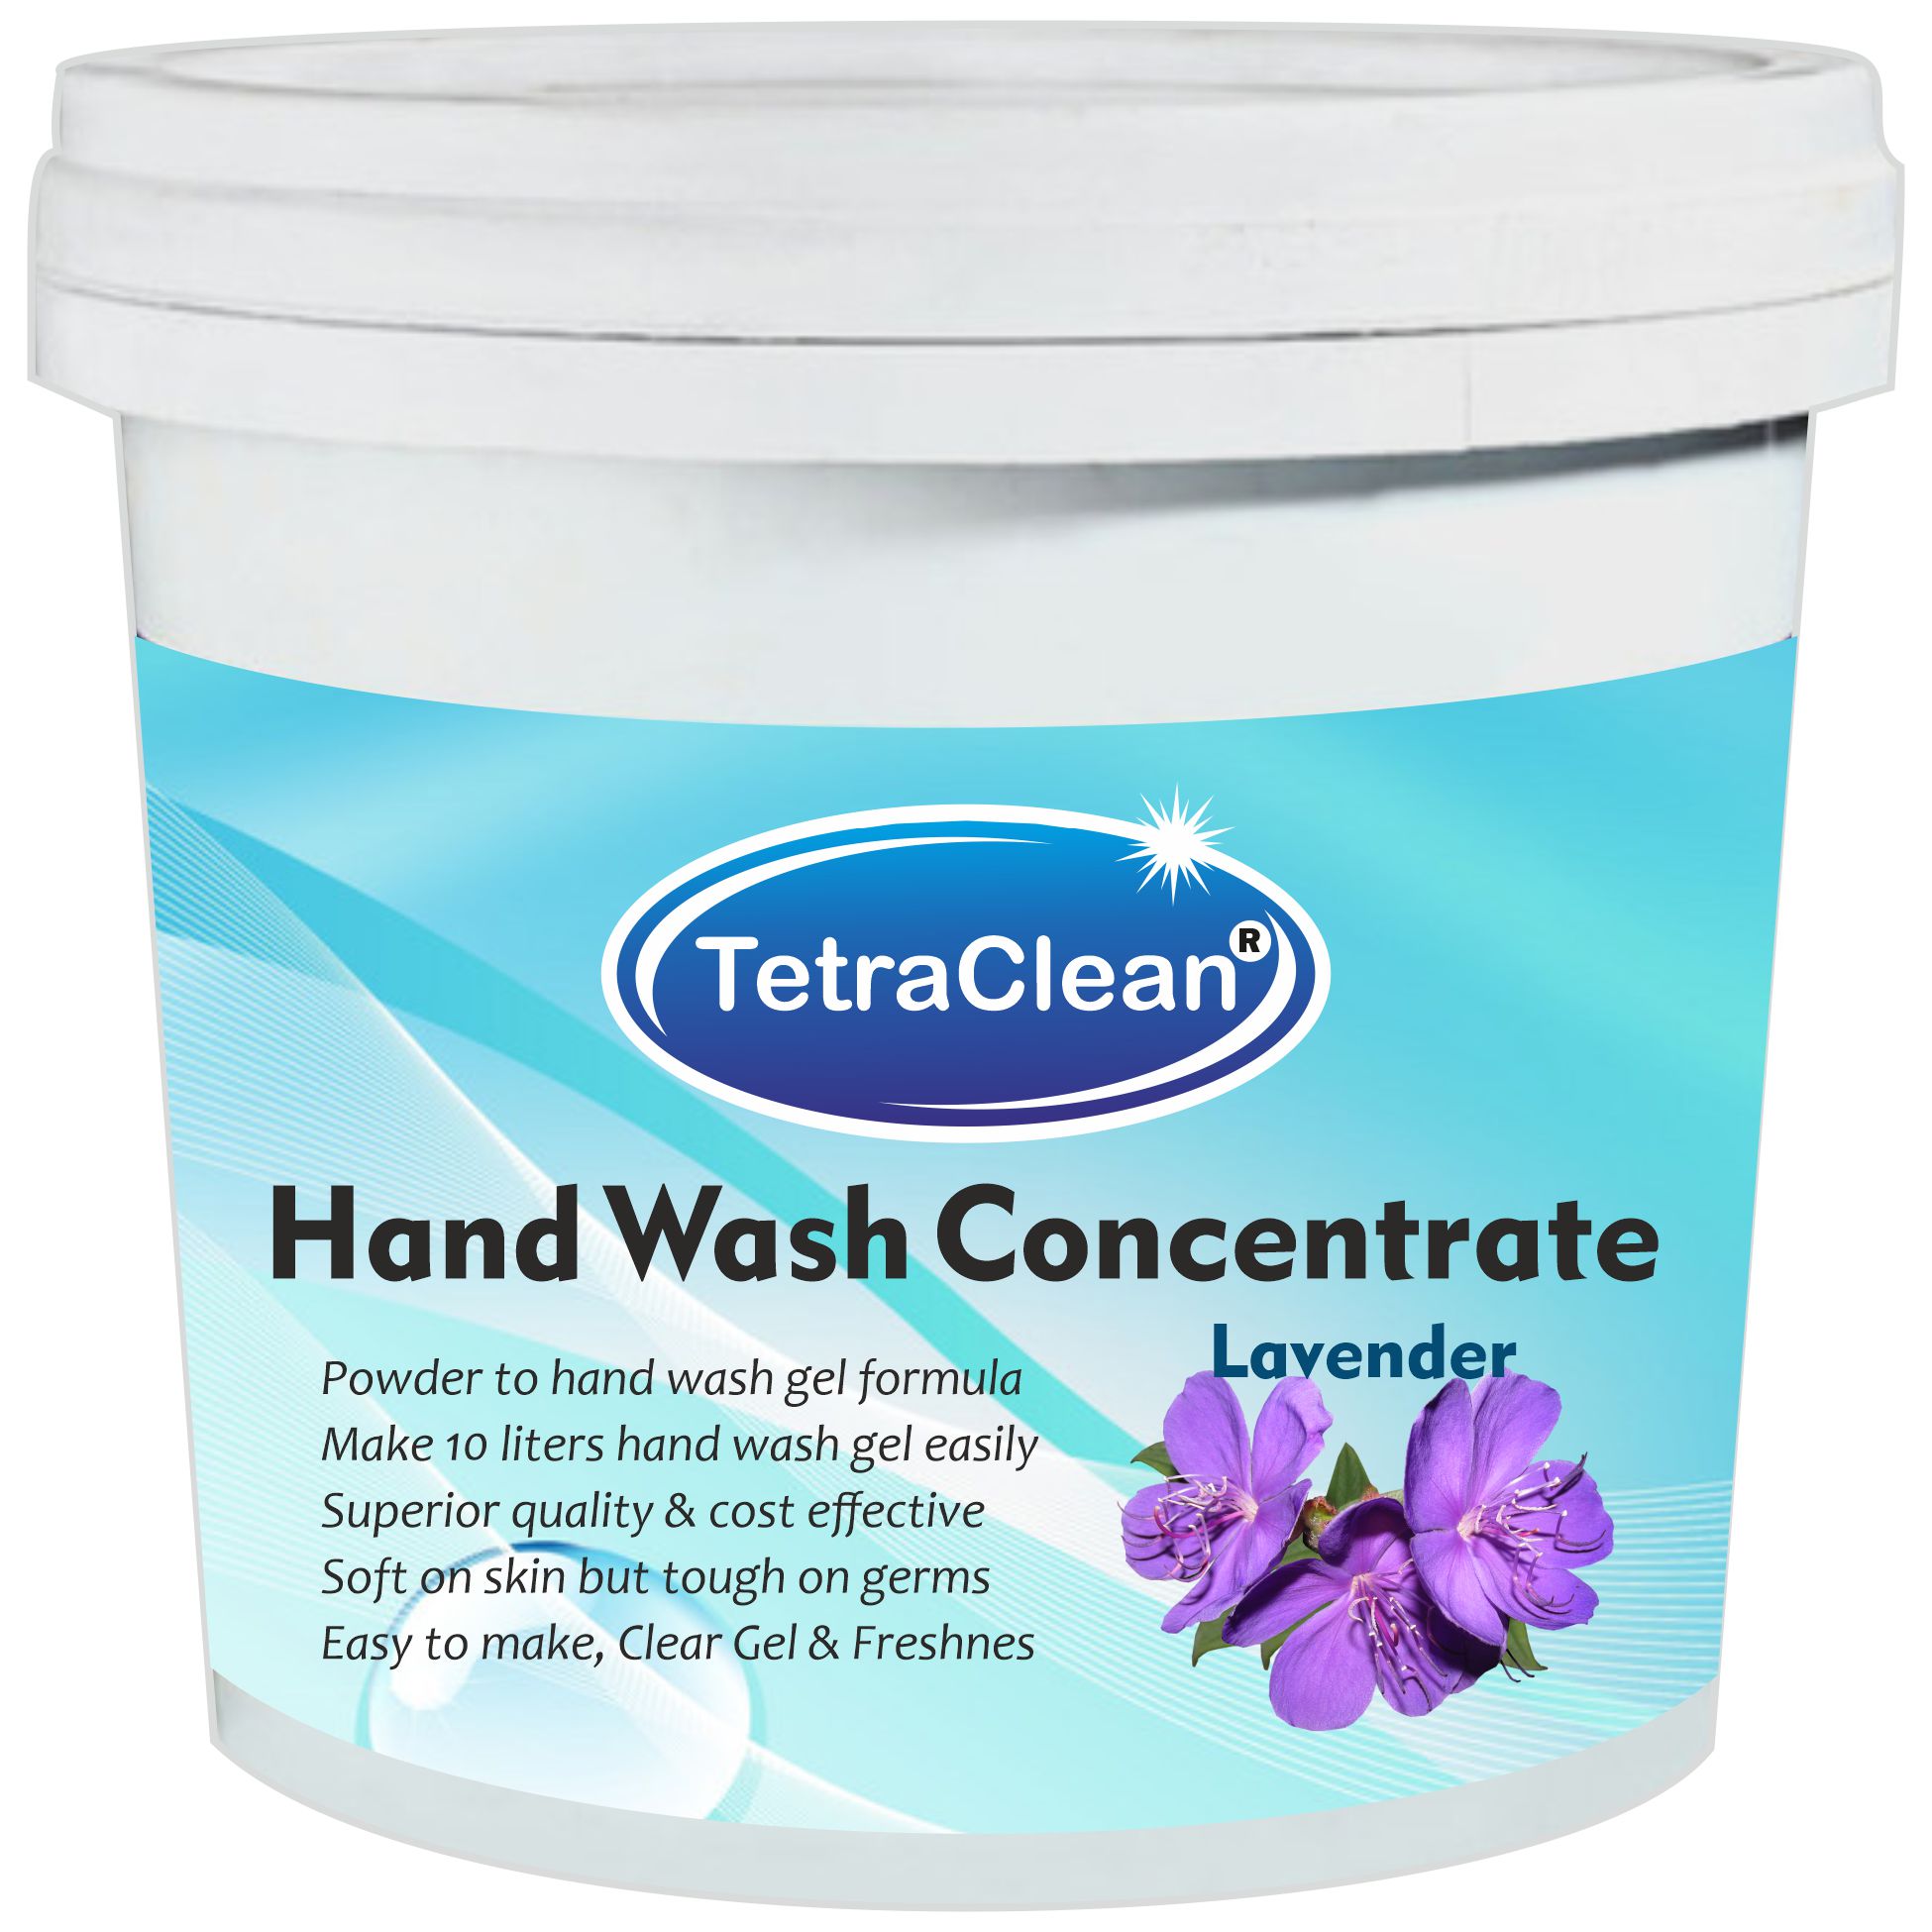 TetraClean Hand Wash Concentrate Powder - 500gm packing - with lavender fragrance